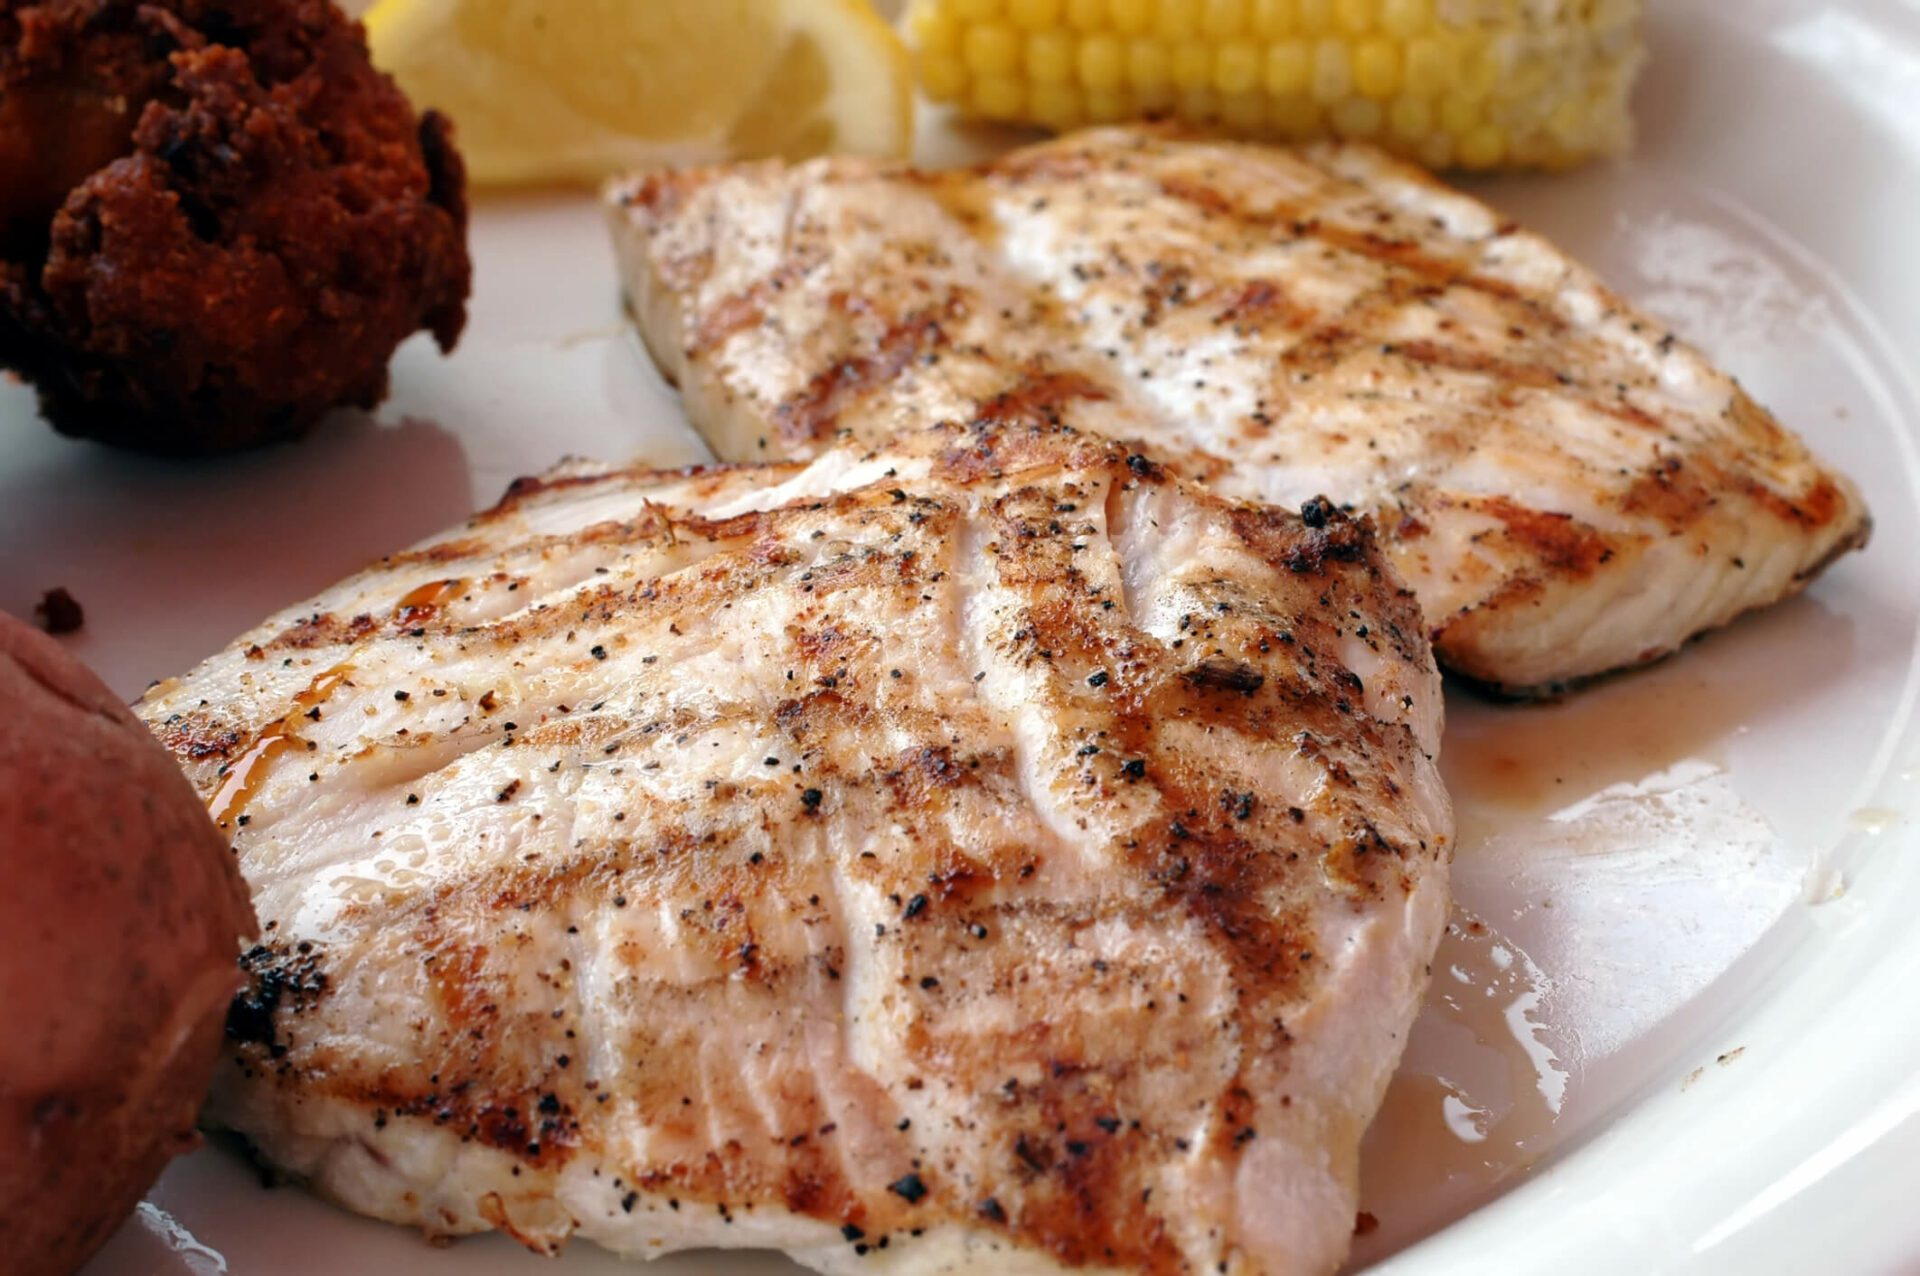 Can you eat Amberjack fish? Absolutely - it tastes great off the grill